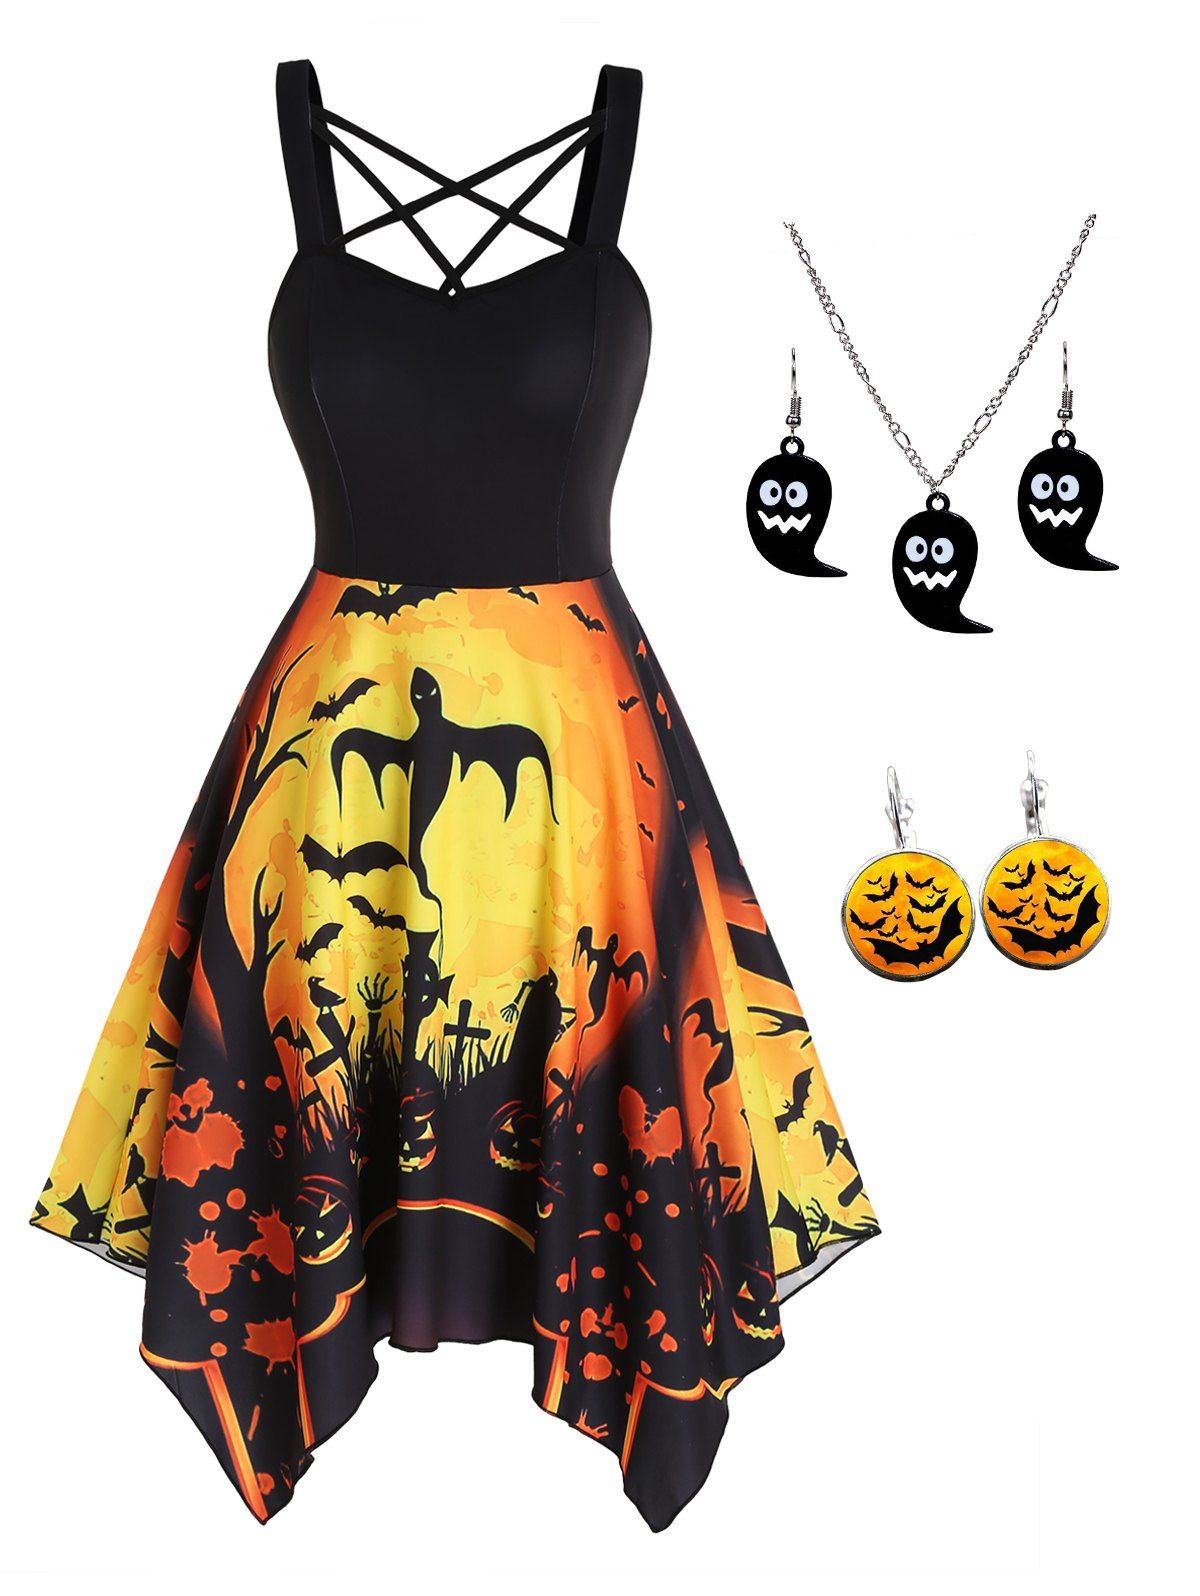 Pumpkin Bat Ghost Print Crisscross Handkerchief Dress And Gothic Necklace Earrings Halloween Outfit - multicolor S